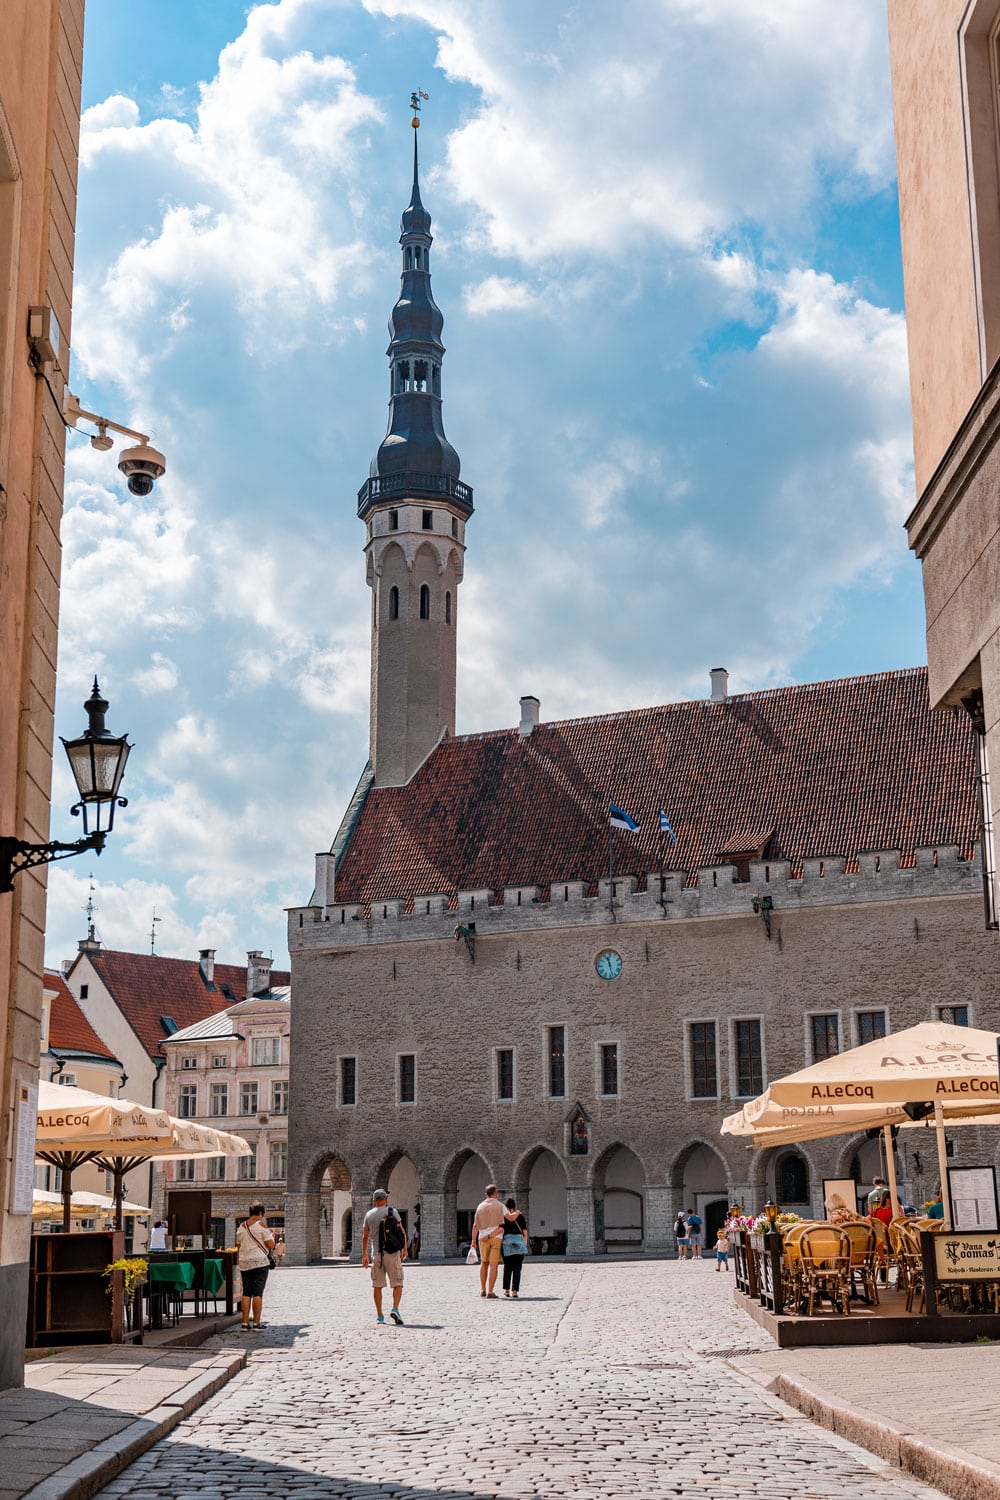 Popular Place to Visit in Tallinn Town Hall Square